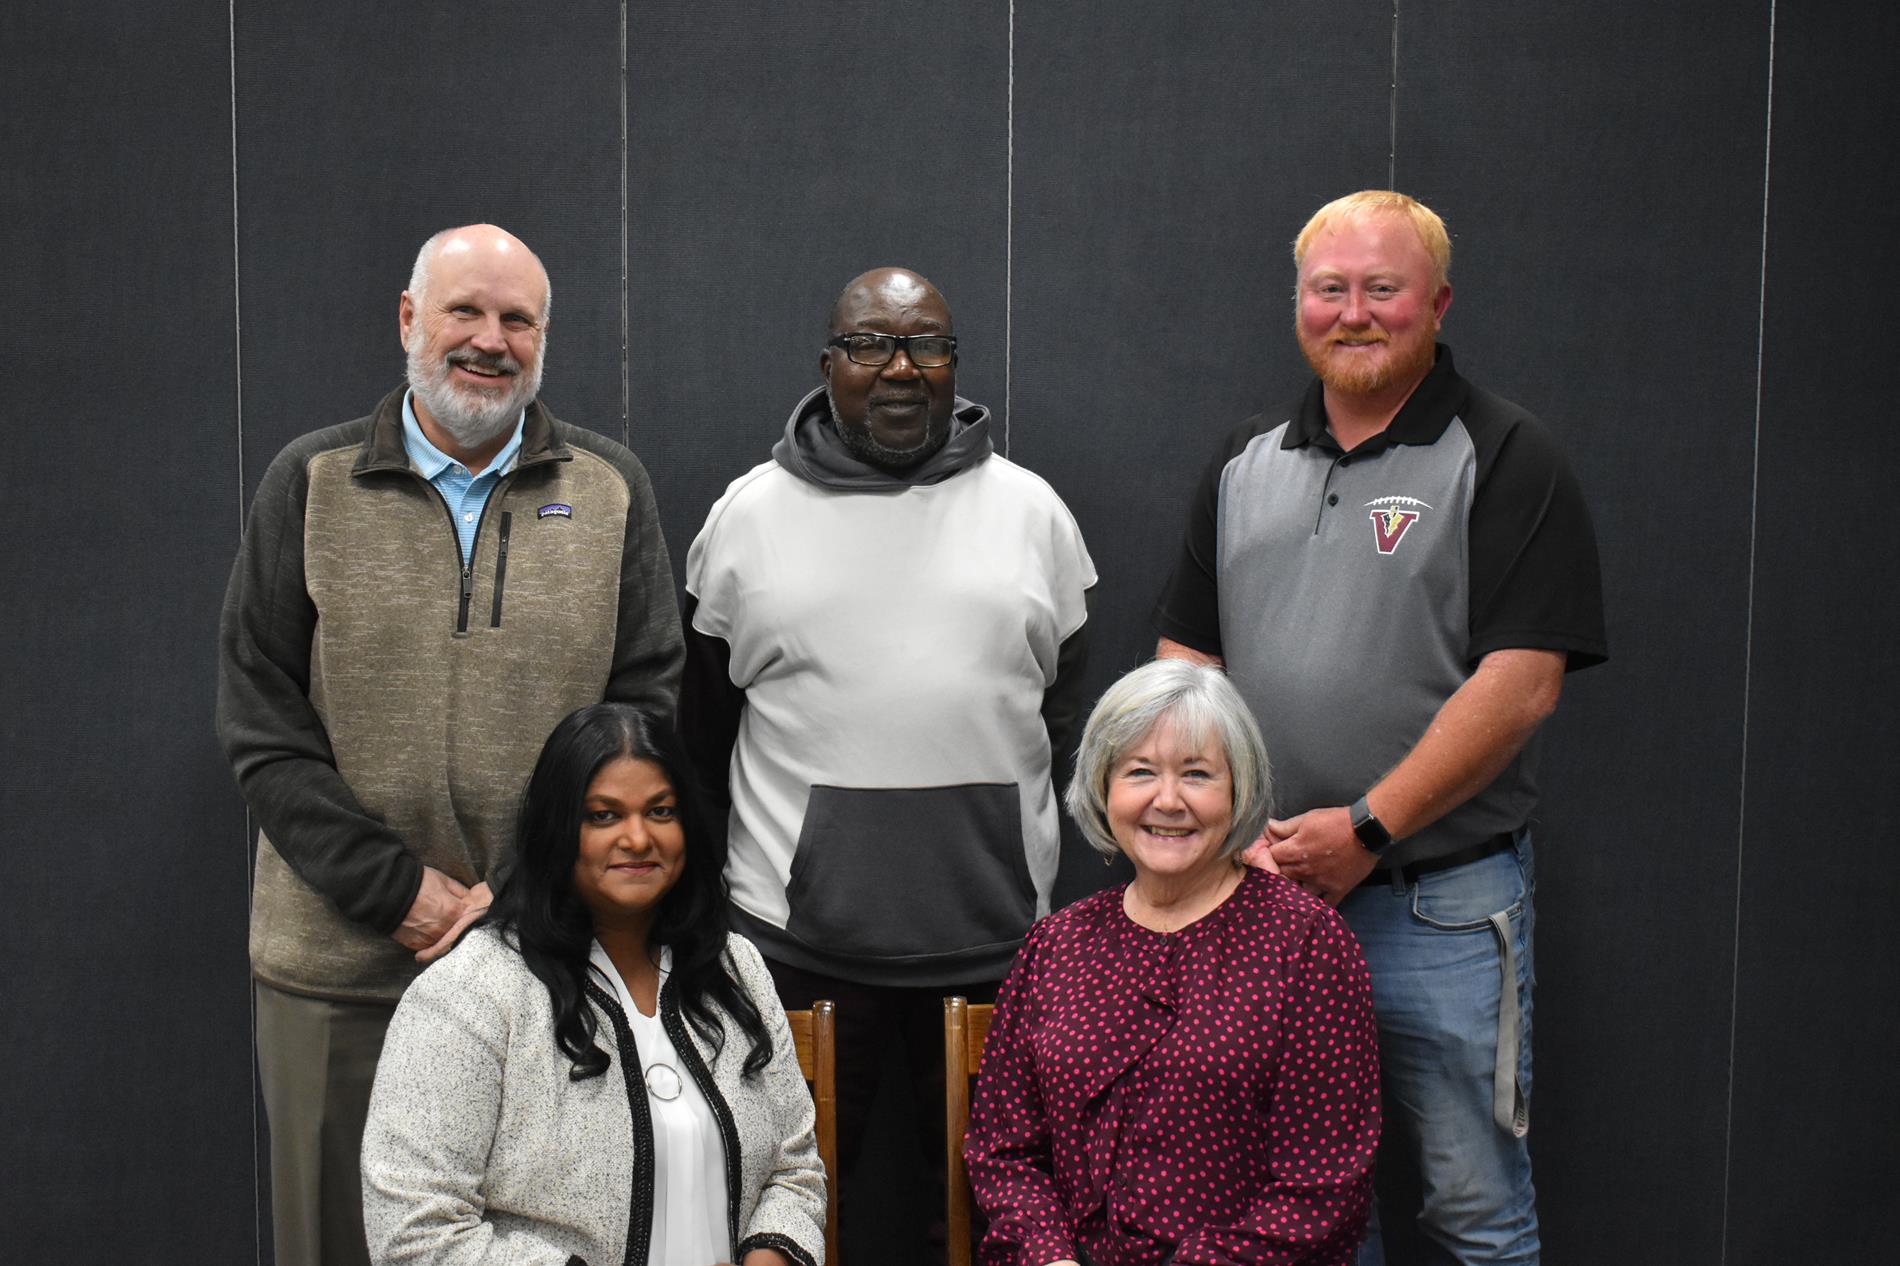 Back Row L-R - Hal Chesser, Bruce Asberry, & Andy Blount. Front Row L-R - Sadia Ajohda & Julee Torrance